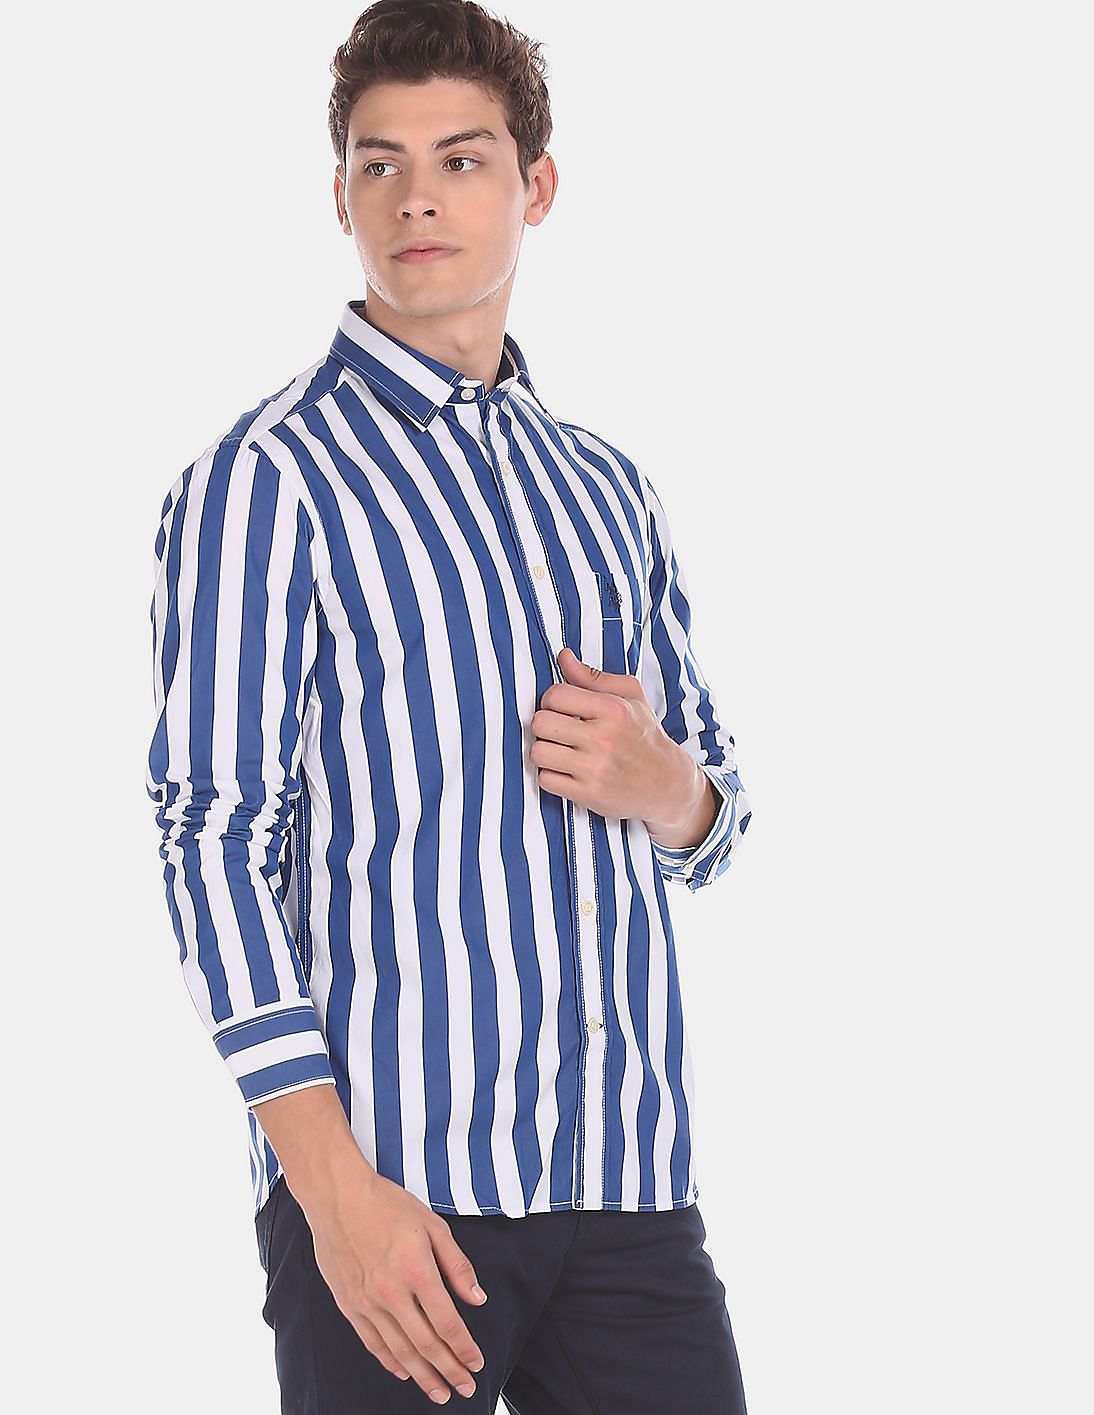  Blue And White Striped Shirt